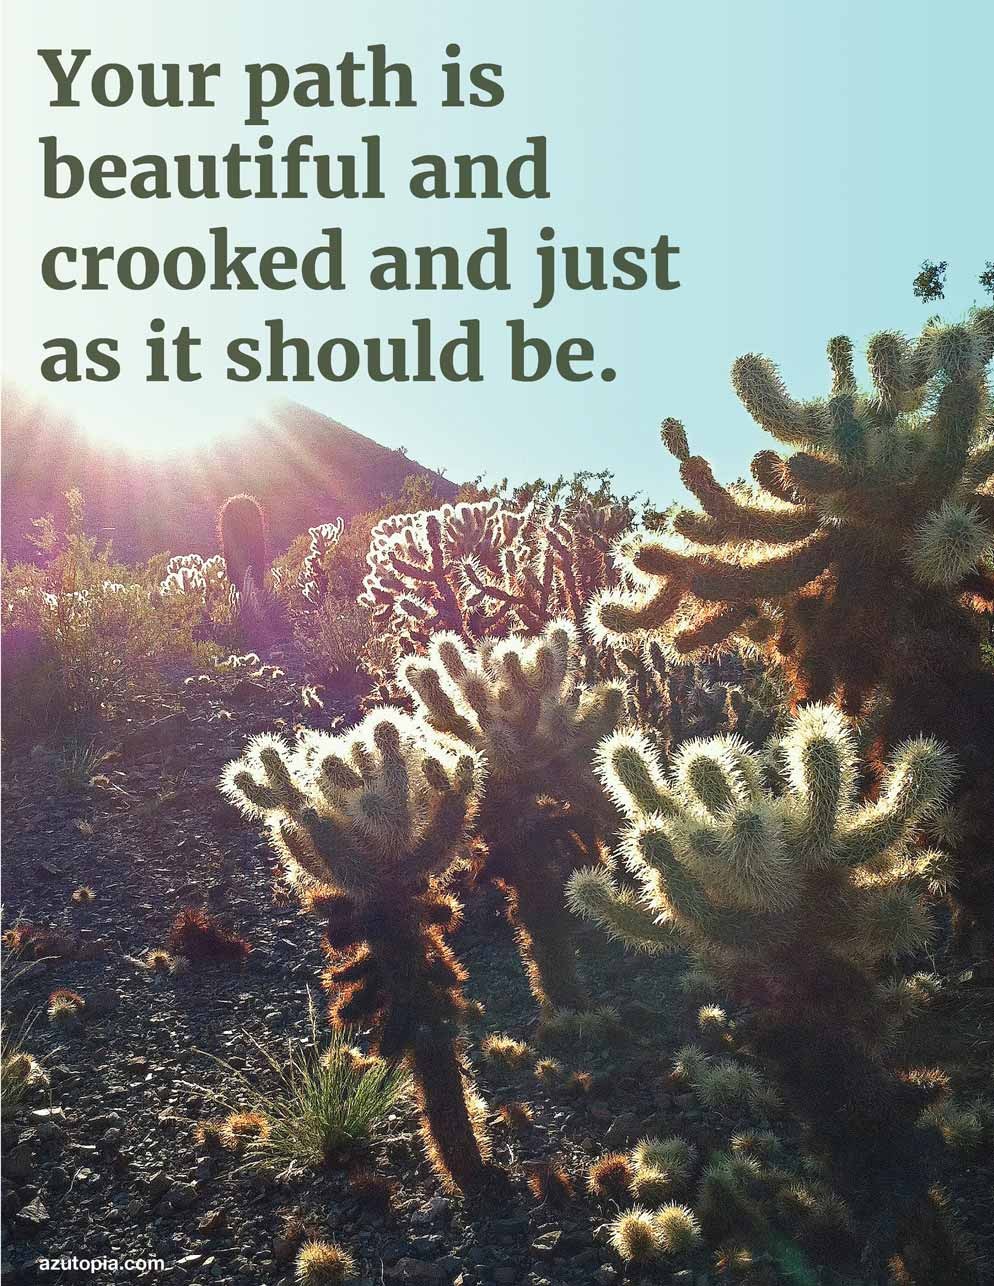 Hiking Inspiration, Poster, Landscape, Dessert, Cholla, Your Path is Beautiful